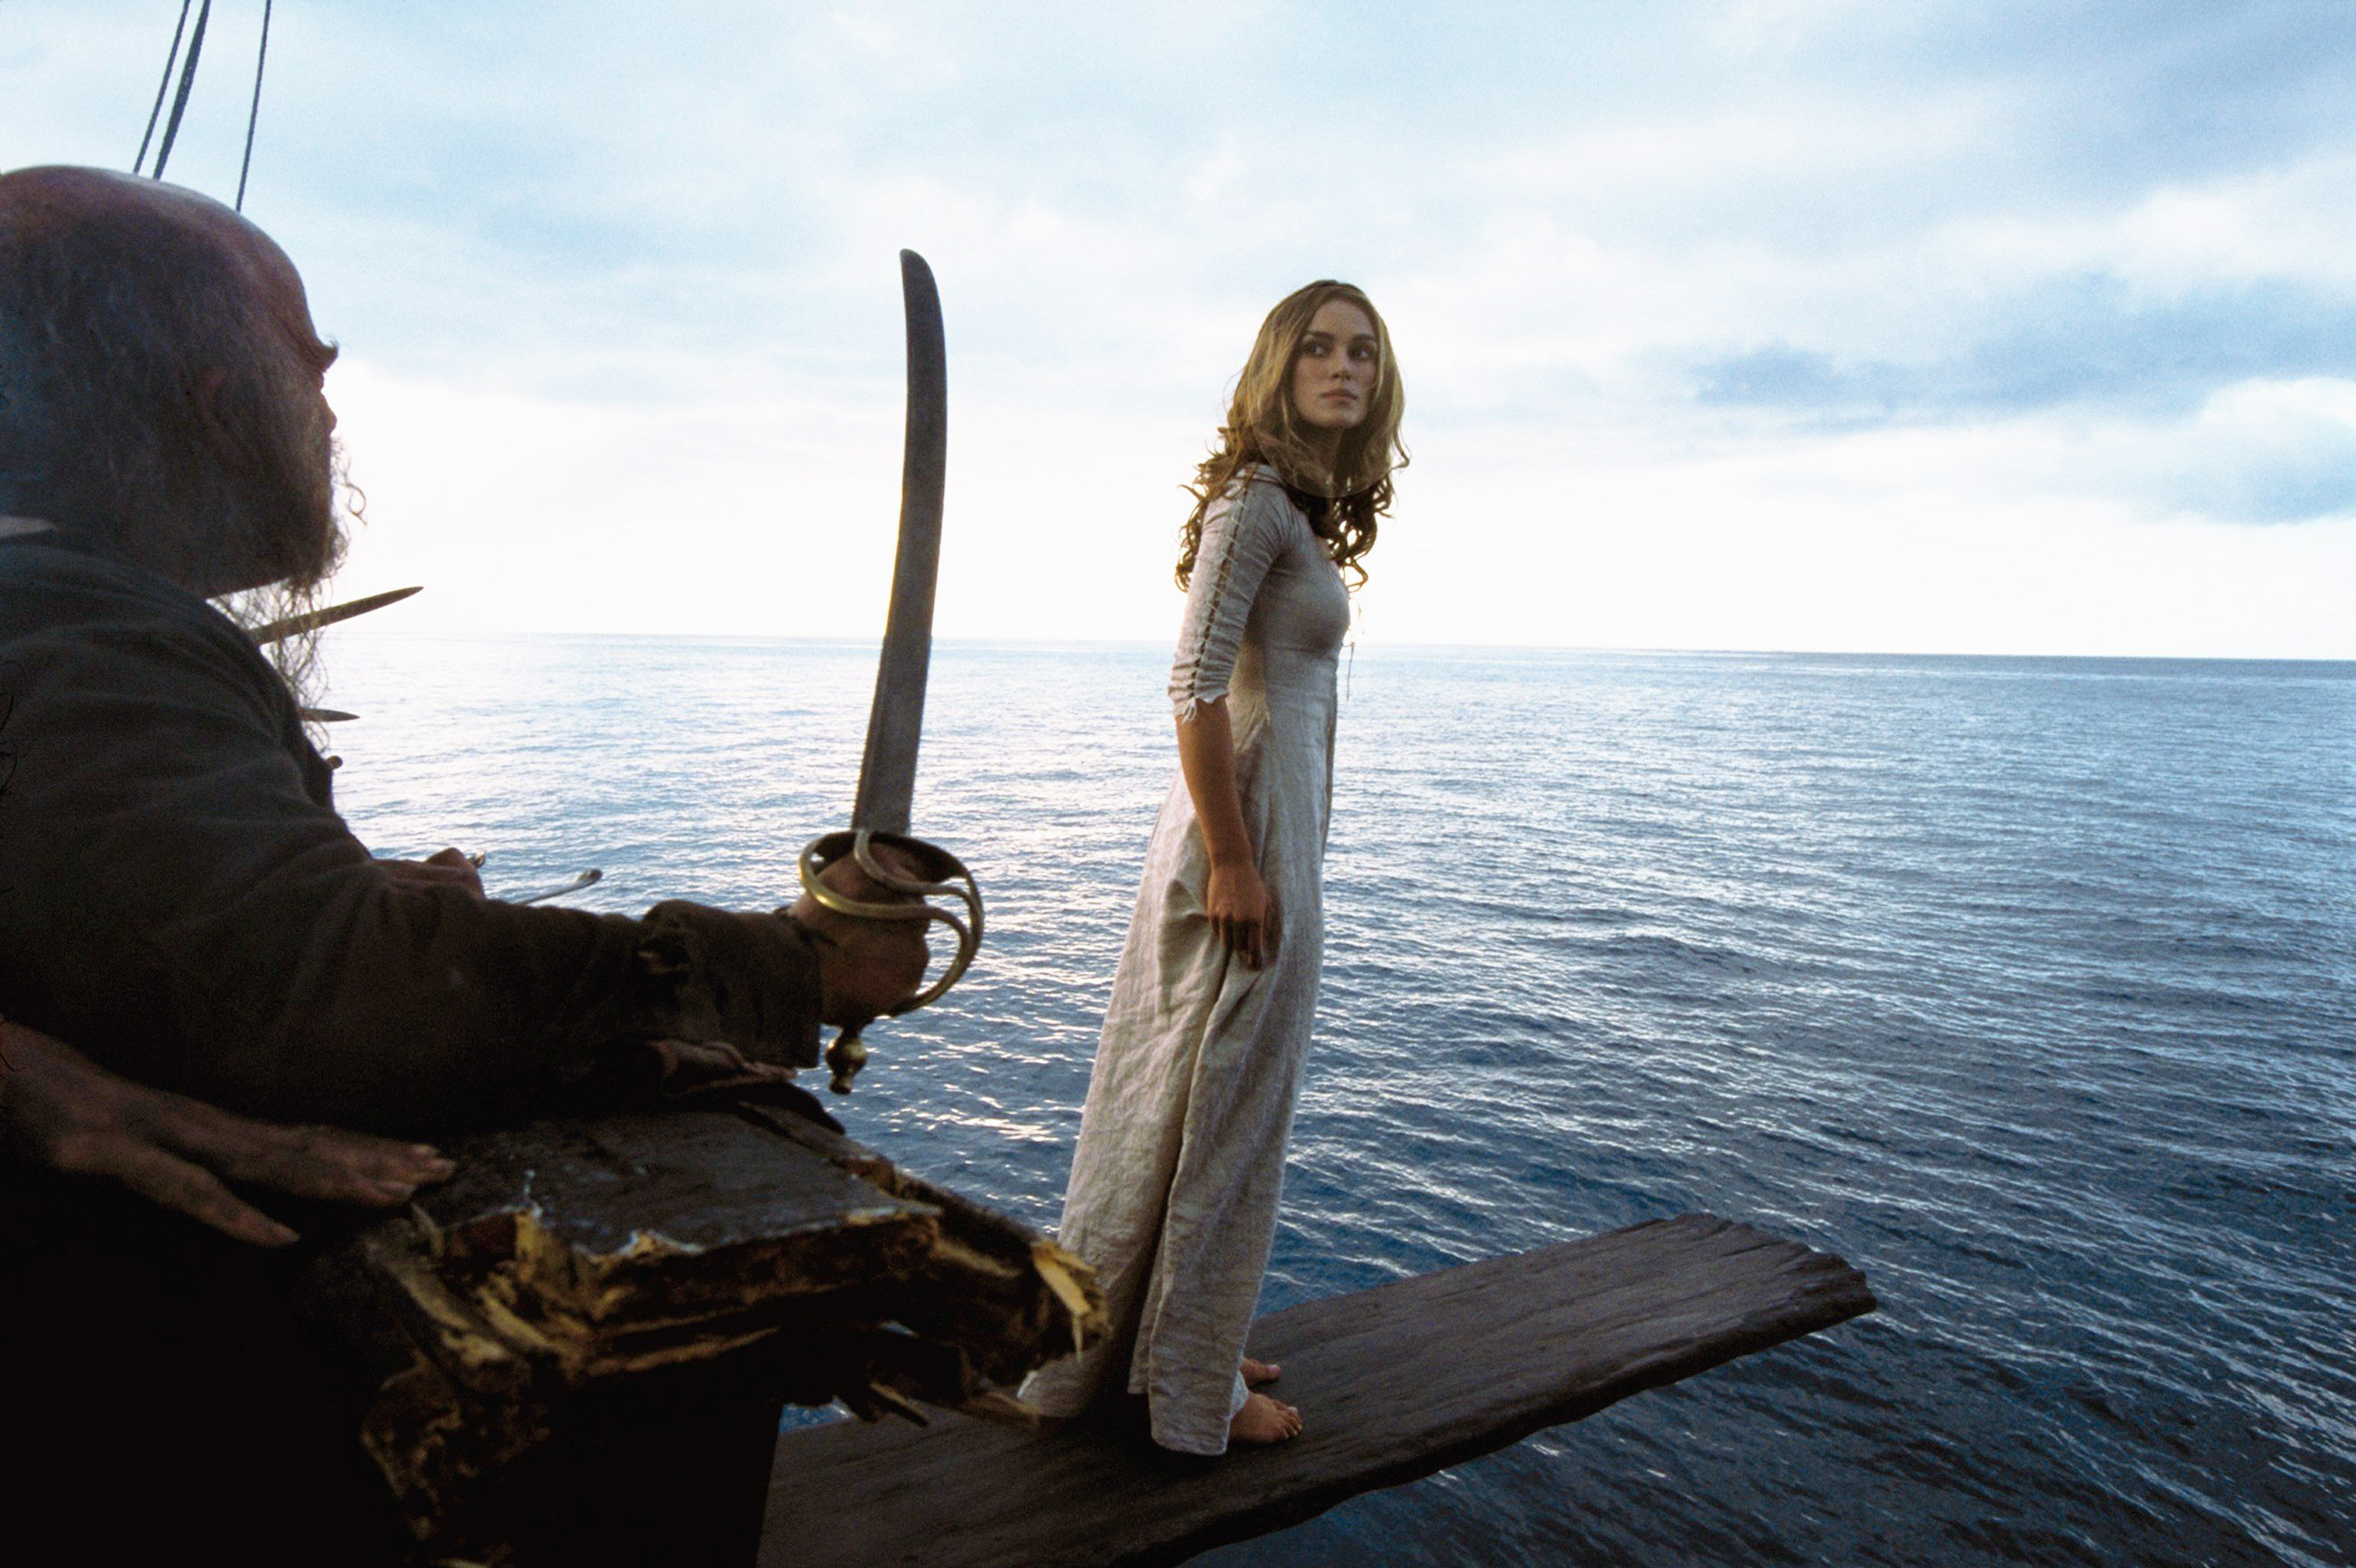 elizabeth swann, movie, pirates of the caribbean: the curse of the black pearl, keira knightley, pirates of the caribbean